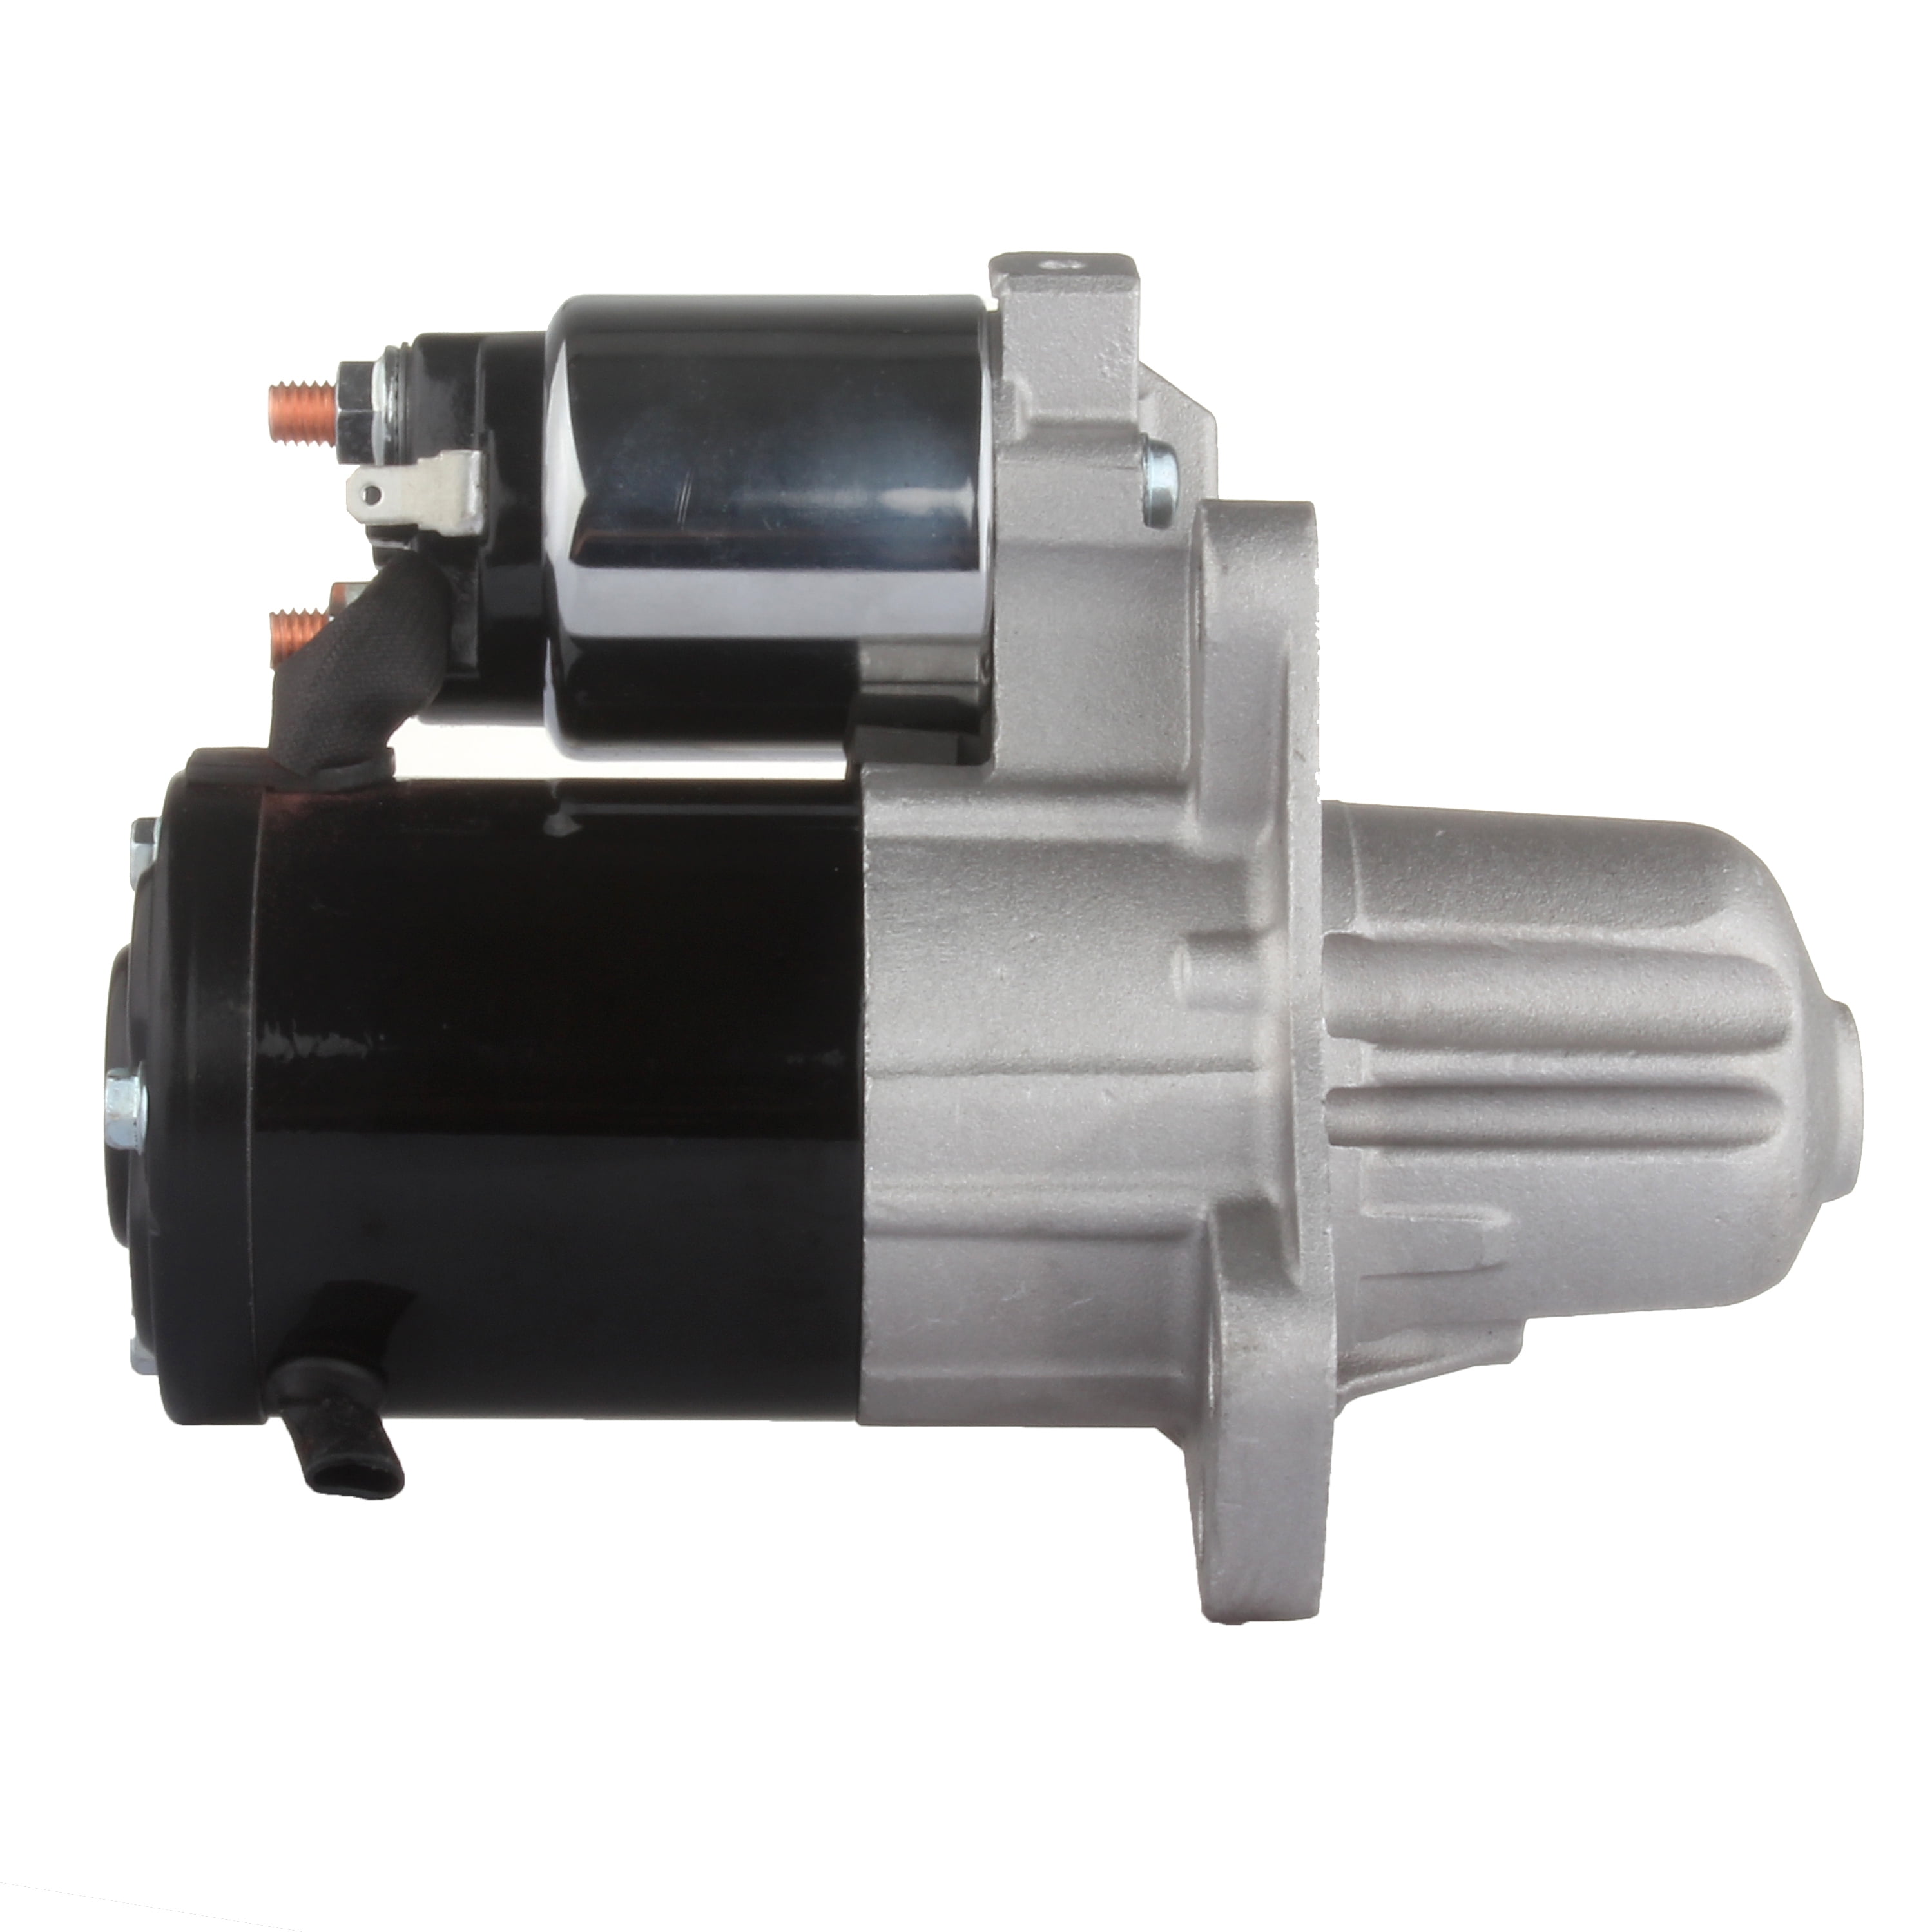 FIRE POWER STARTER MOTOR BLACK 2012-2013 VICTORY Cross Country Tour SAB0164 